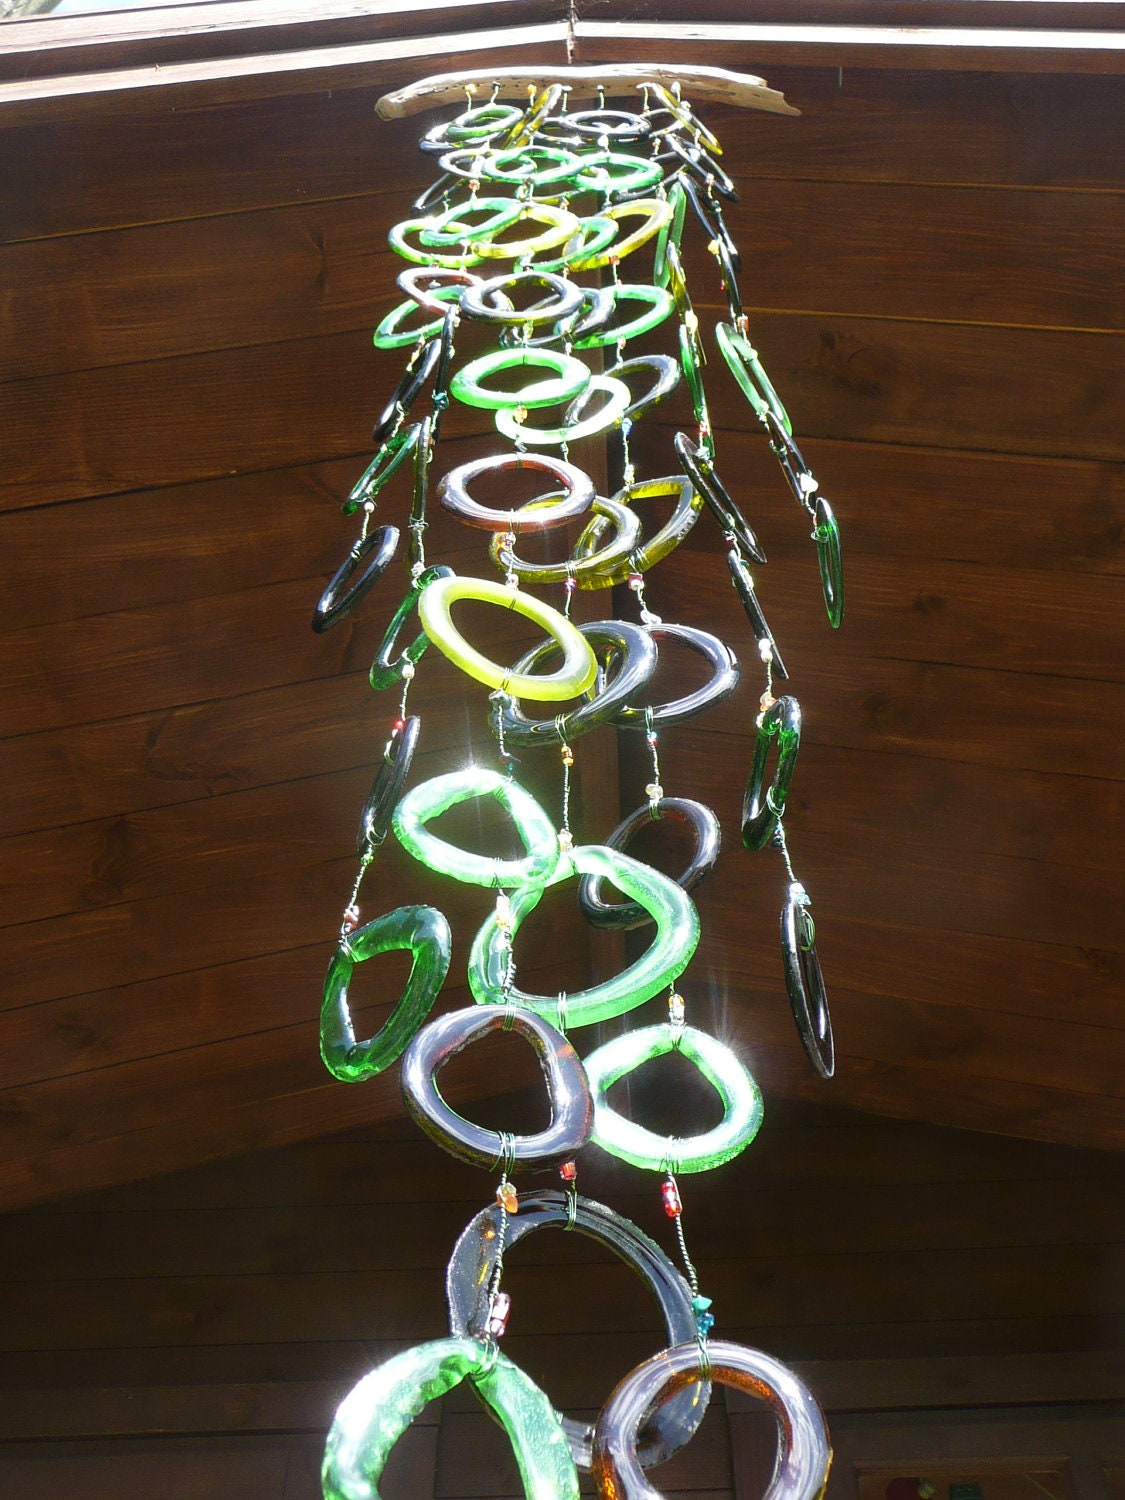 Cascade of light and colour made from recycled bottle glass